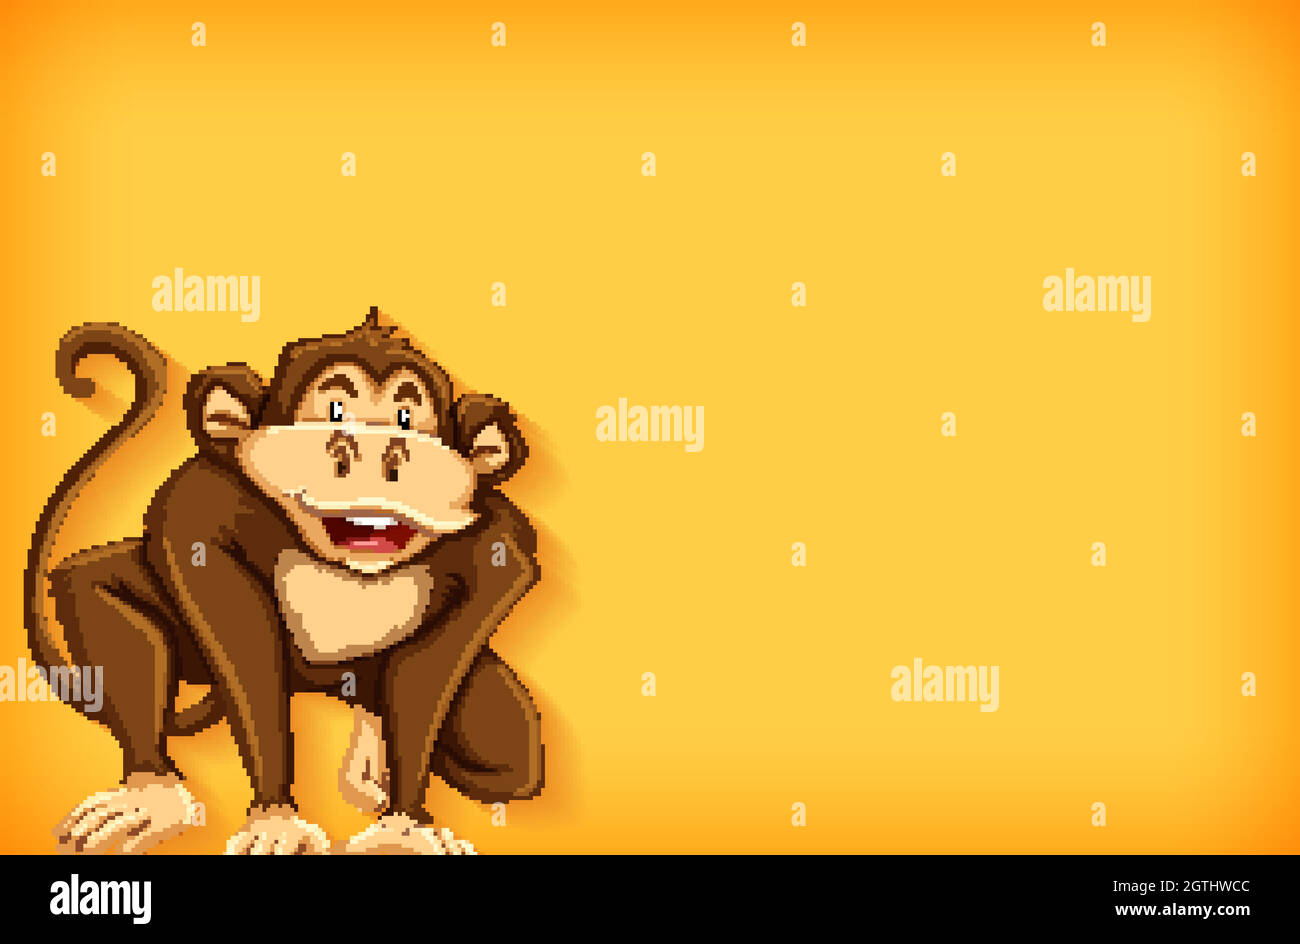 Background template with plain color and cute monkey Stock Vector